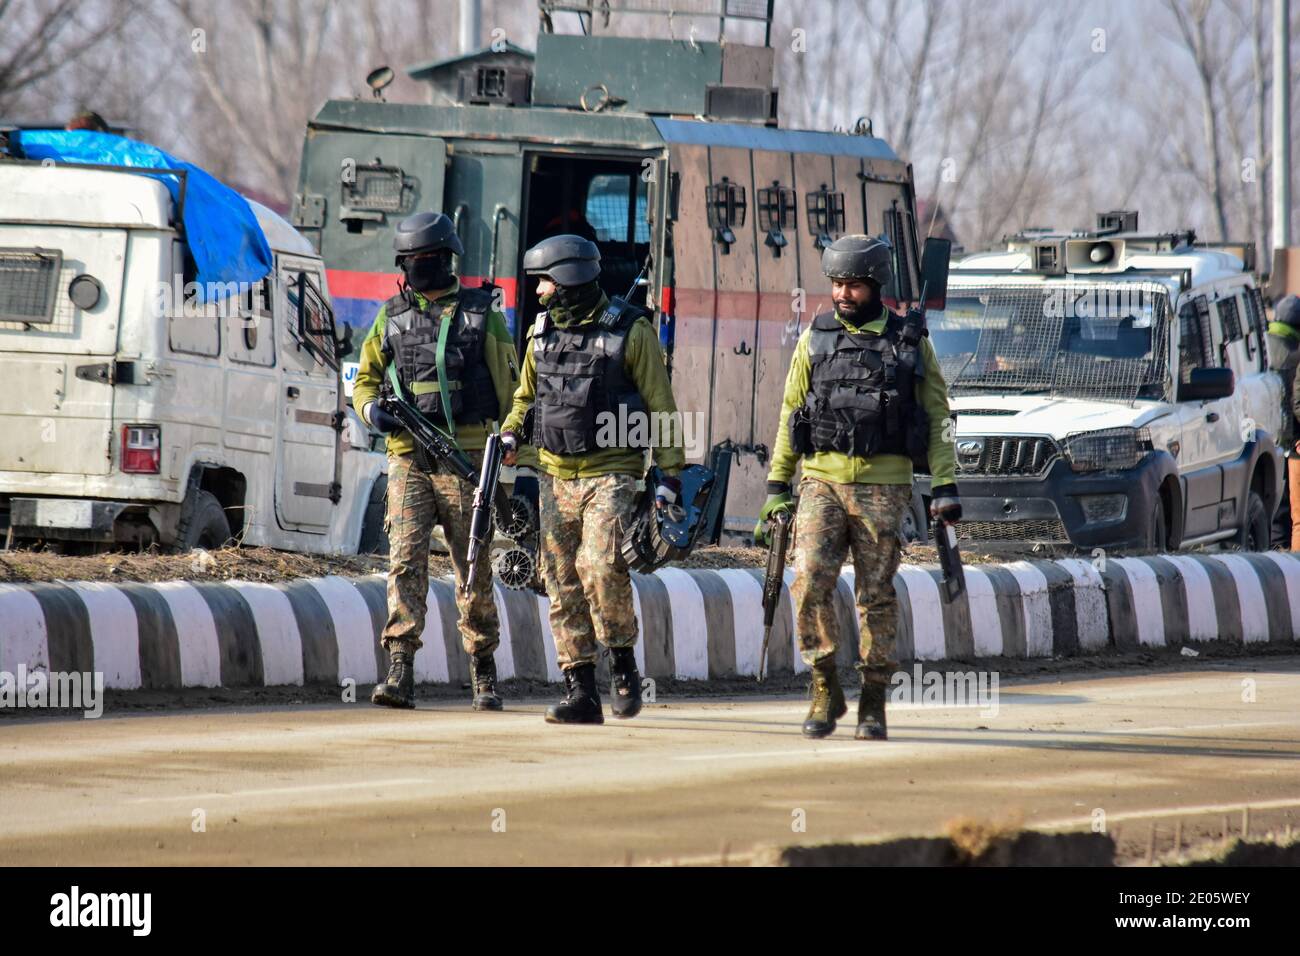 Indian army soldiers patrol near the gun battle site on the outskirts of Srinagar.Three militants were killed in an overnight gun battle with government forces in Lawaypora area of Srinagar. The militants killed were planning a big strike on the Srinagar-Muzaffarabad highway, an official said. Stock Photo